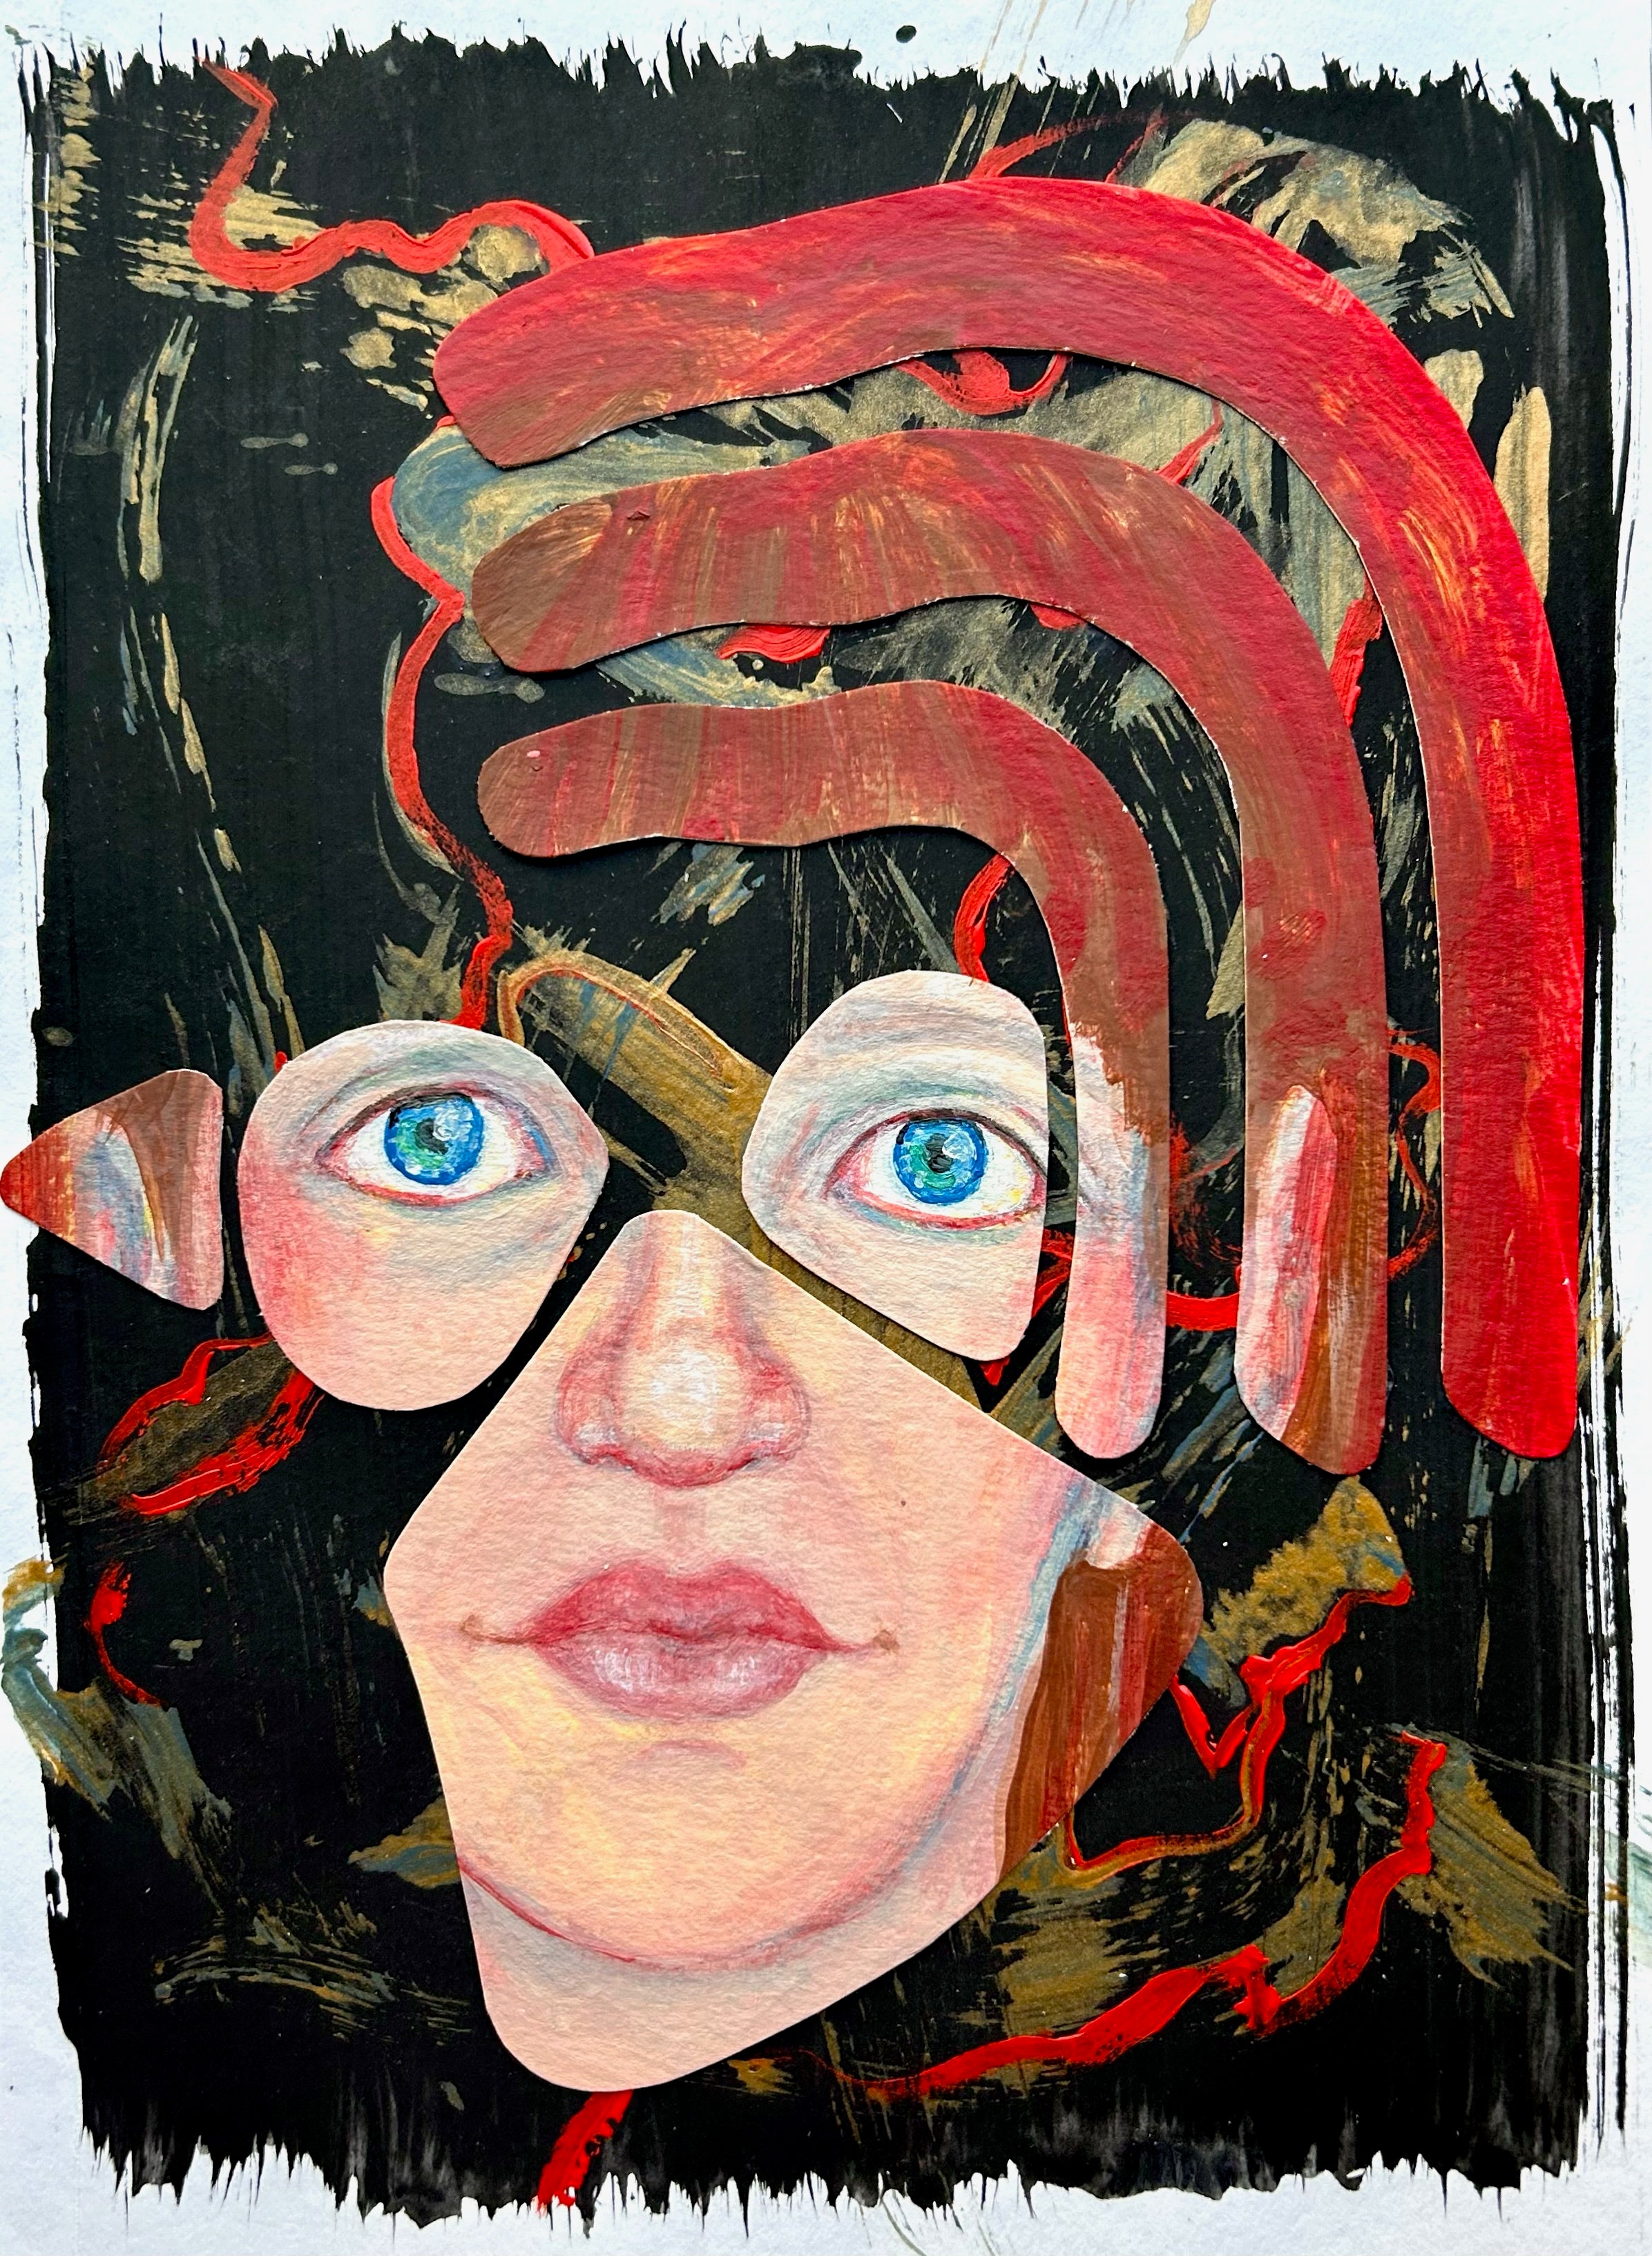 'JANE'S SECRET IDENTITY' - Acrylic Paint, Charcoal, Calligraphy Ink, and Glue on Paper